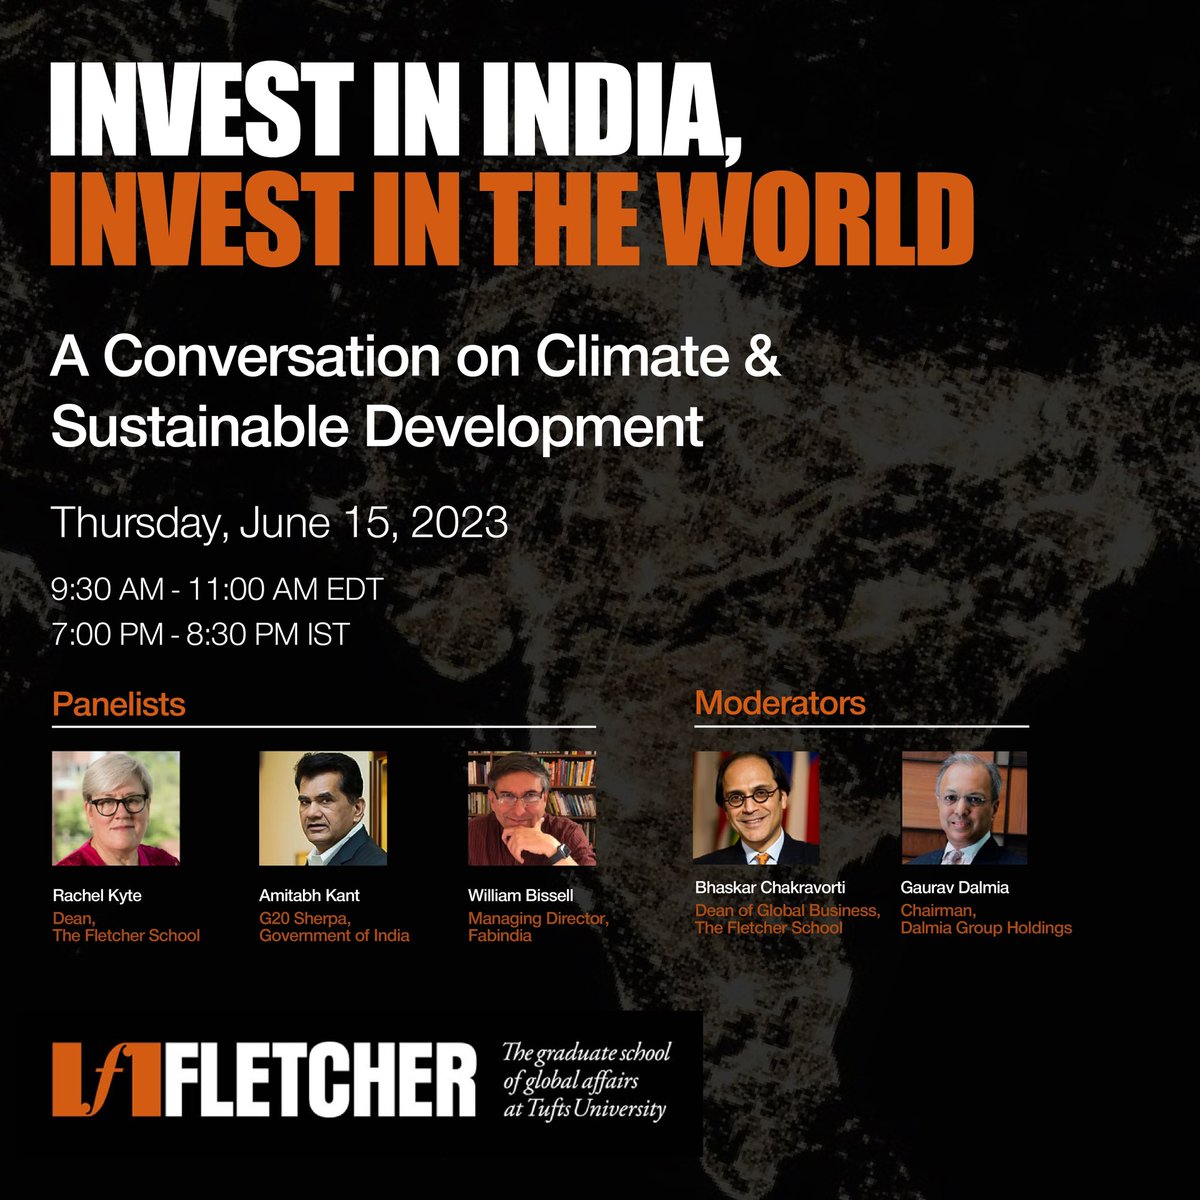 Join Mr William Bissell, @amitabhk87 and @rkyte365 for 'A Conversation on Climate and Sustainable Development' hosted by @FletcherSchool at @TuftsUniversity Register now: bit.ly/Registration-I… #ClimateChange #SDGs #ESG #Sustainability #InvestinIndia